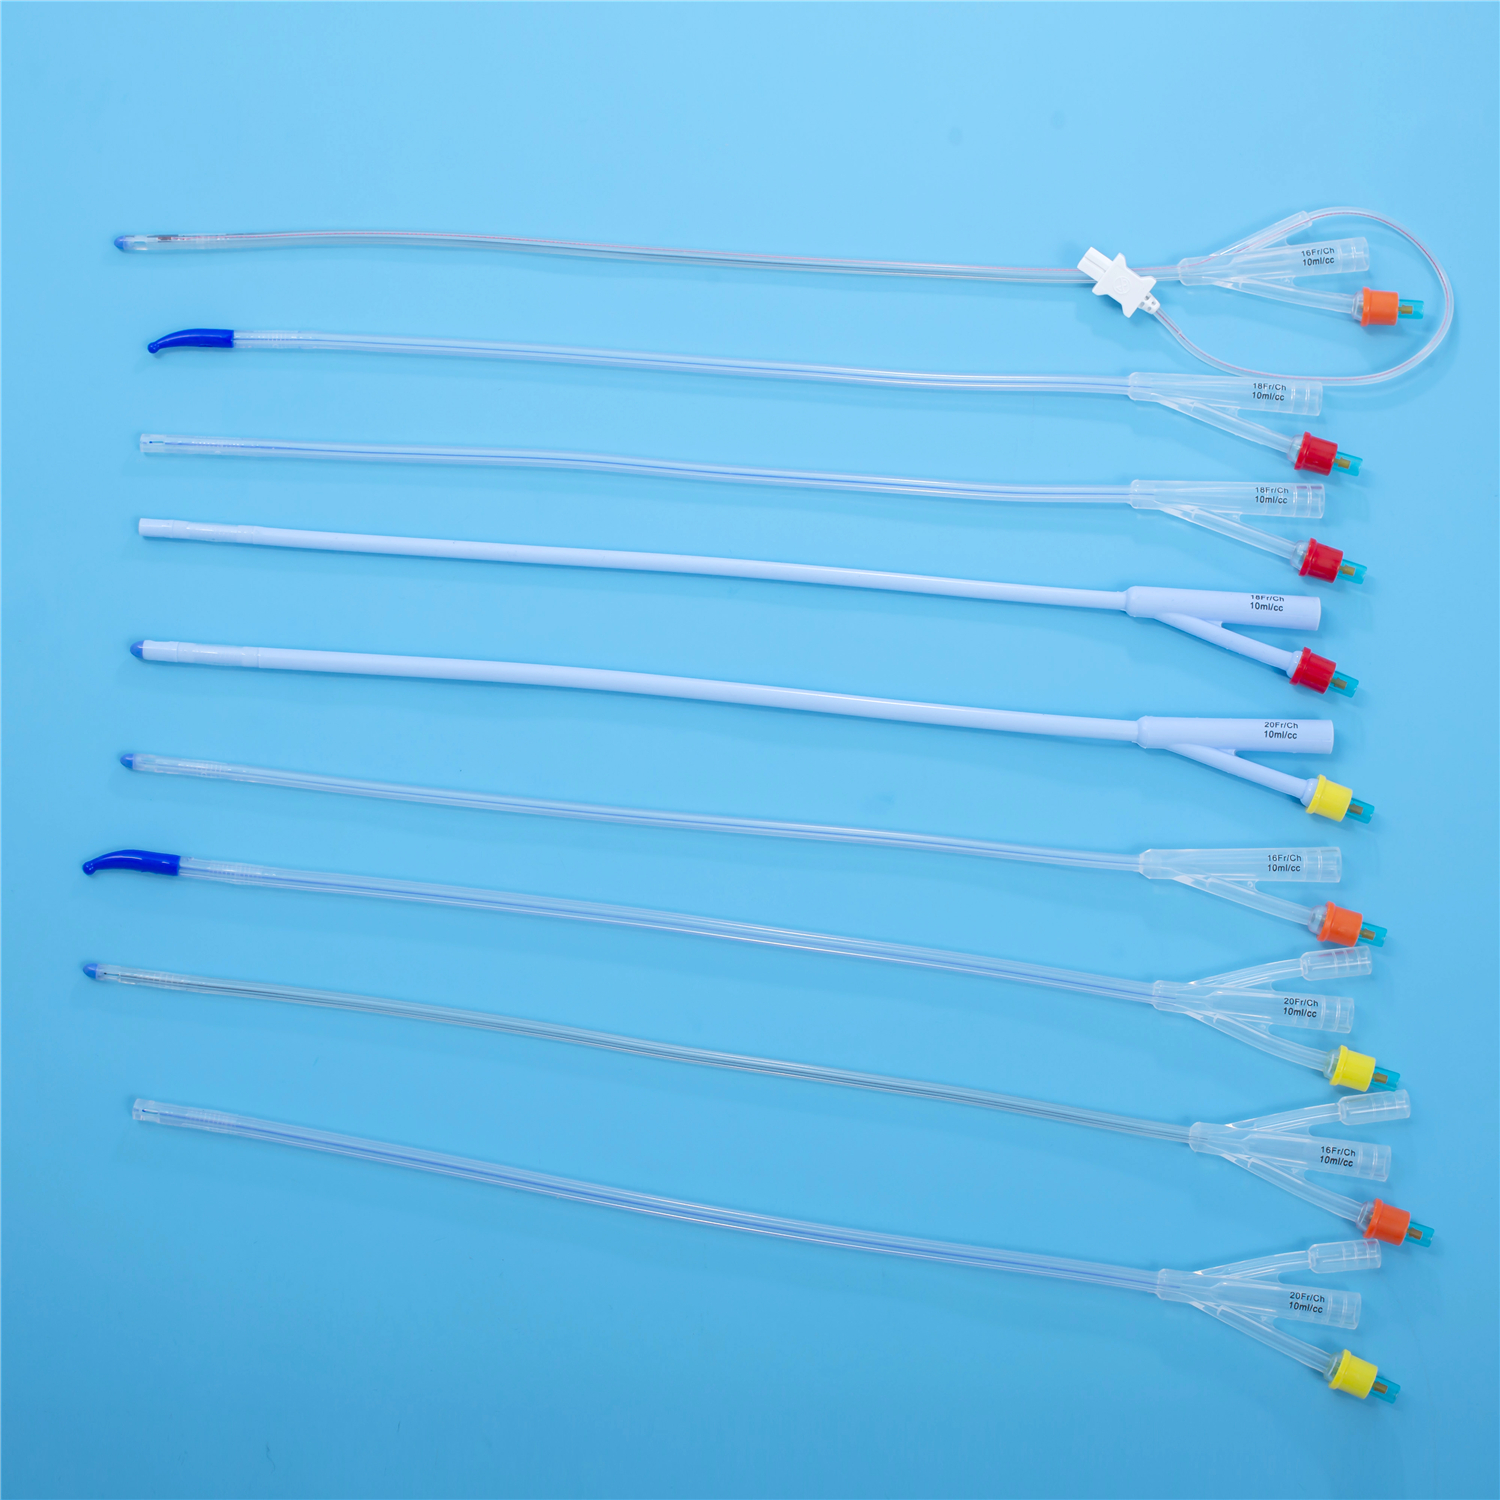 Integrated Flat Balloon Silicone Urinary Catheter with Round Tip, Tiemann Tip, Open Tip, 2 Way, 3 Way Uretheral or Suprapubic Use Integral Flat China Factory